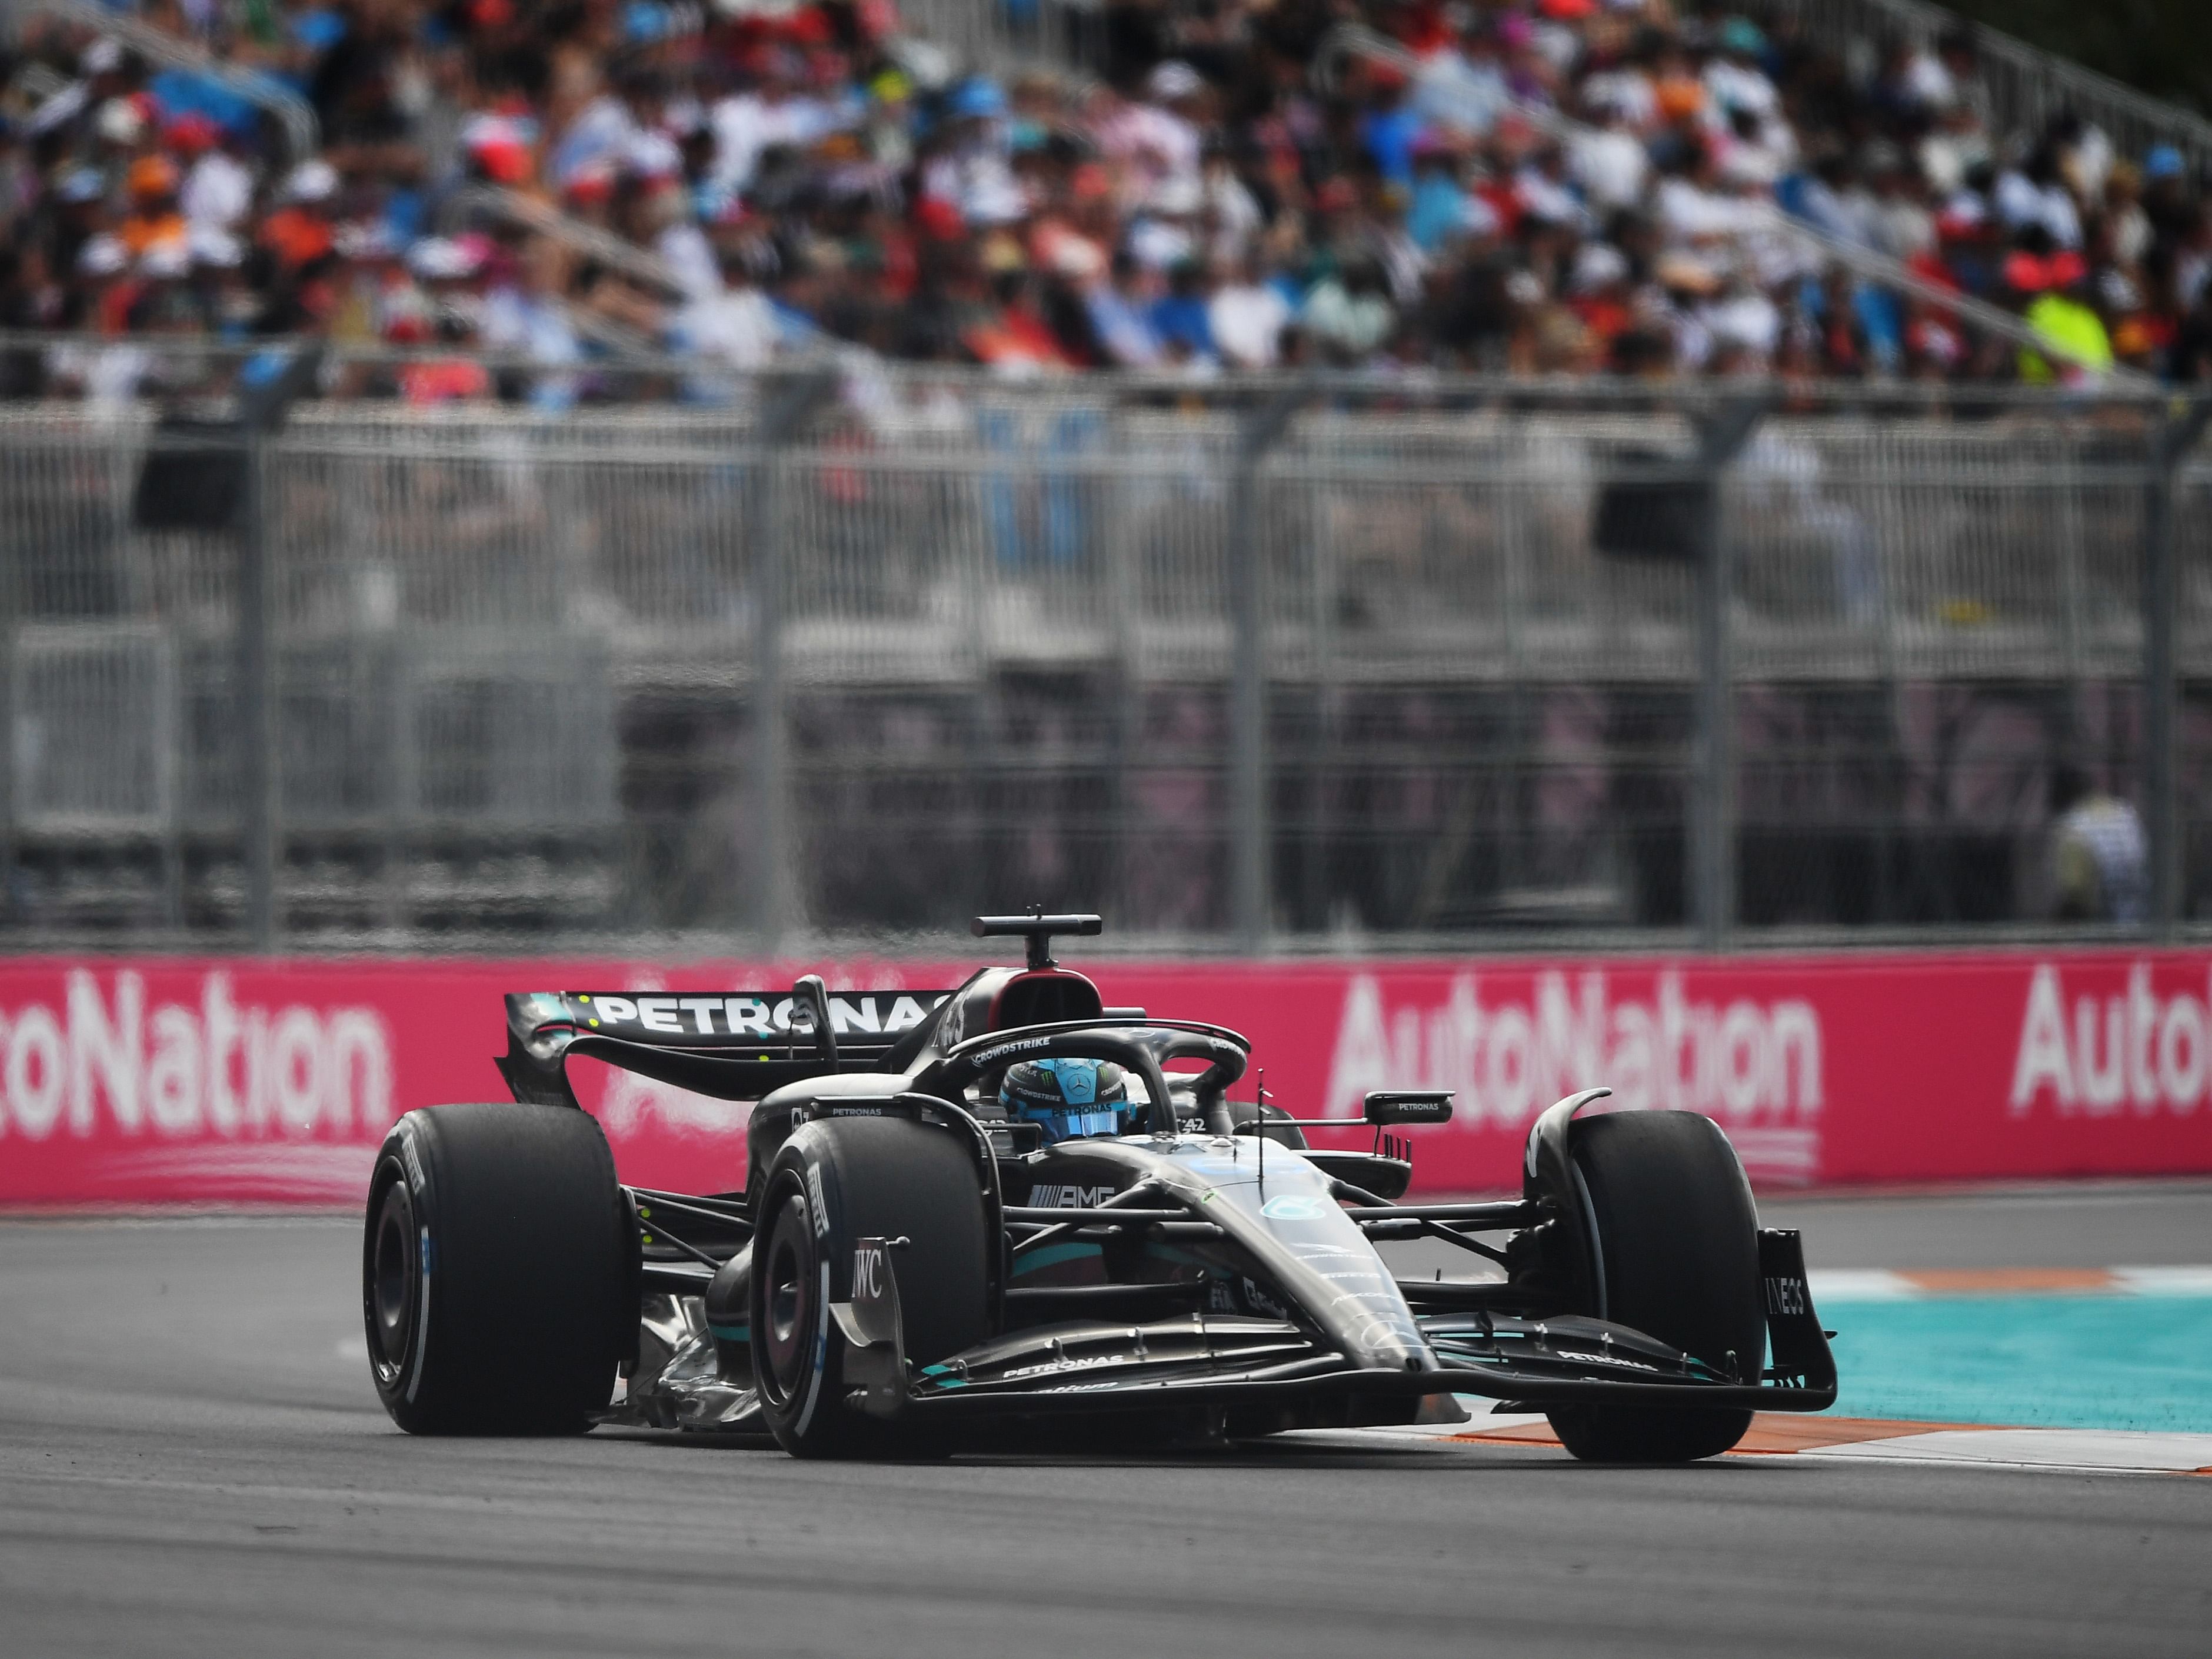 George Russell (63) on track during the 2023 F1 Miami Grand Prix (Photo by Rudy Carezzevoli/Getty Images)